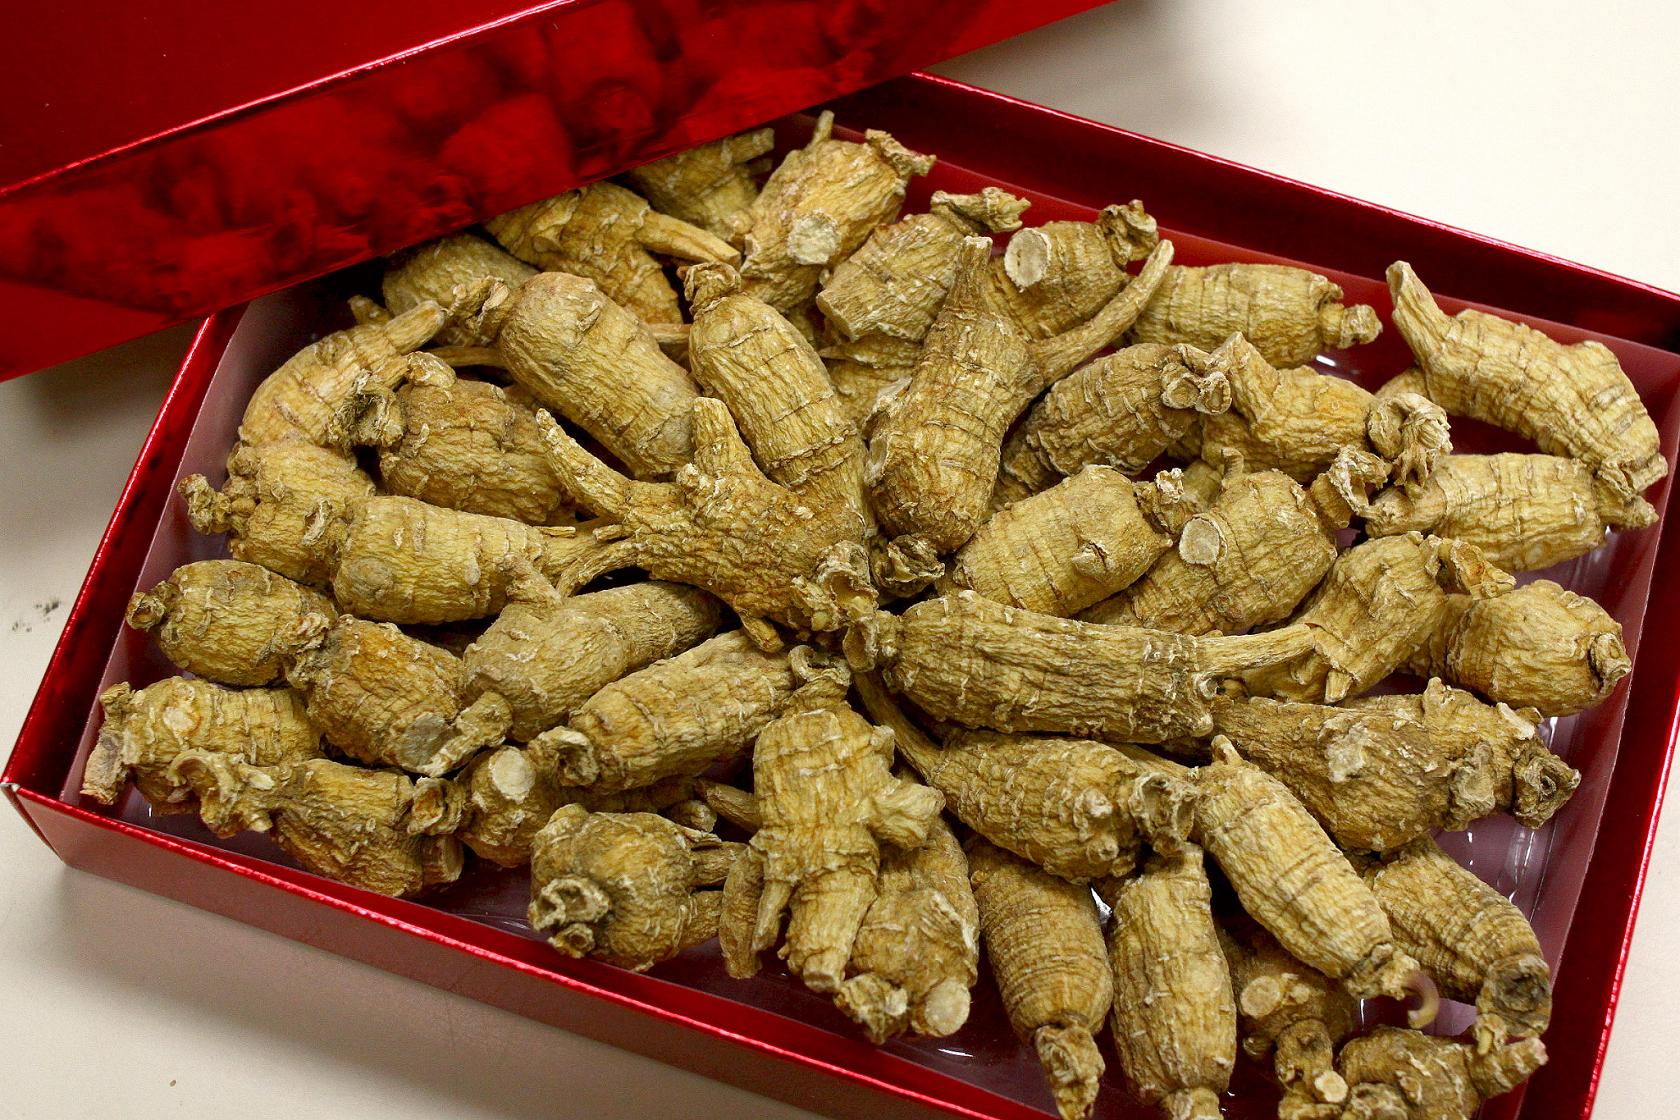 The Agriculture, Fisheries and Conservation Department today (January 16) reminded members of the public not to bring endangered species into Hong Kong without a required licence when returning from visits to other places. Photo shows American ginseng which is among the most commonly seized regulated species.